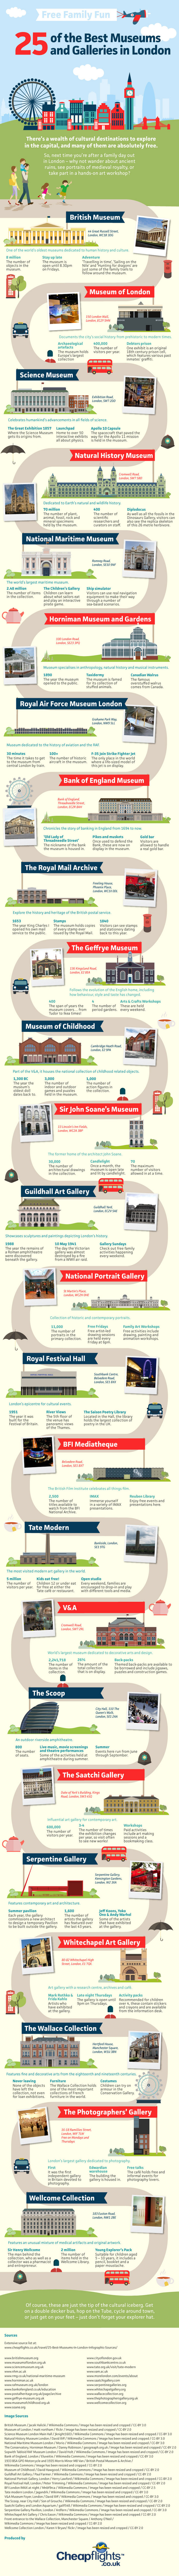 Travel tips: 25 Free Things to do in London Infographic